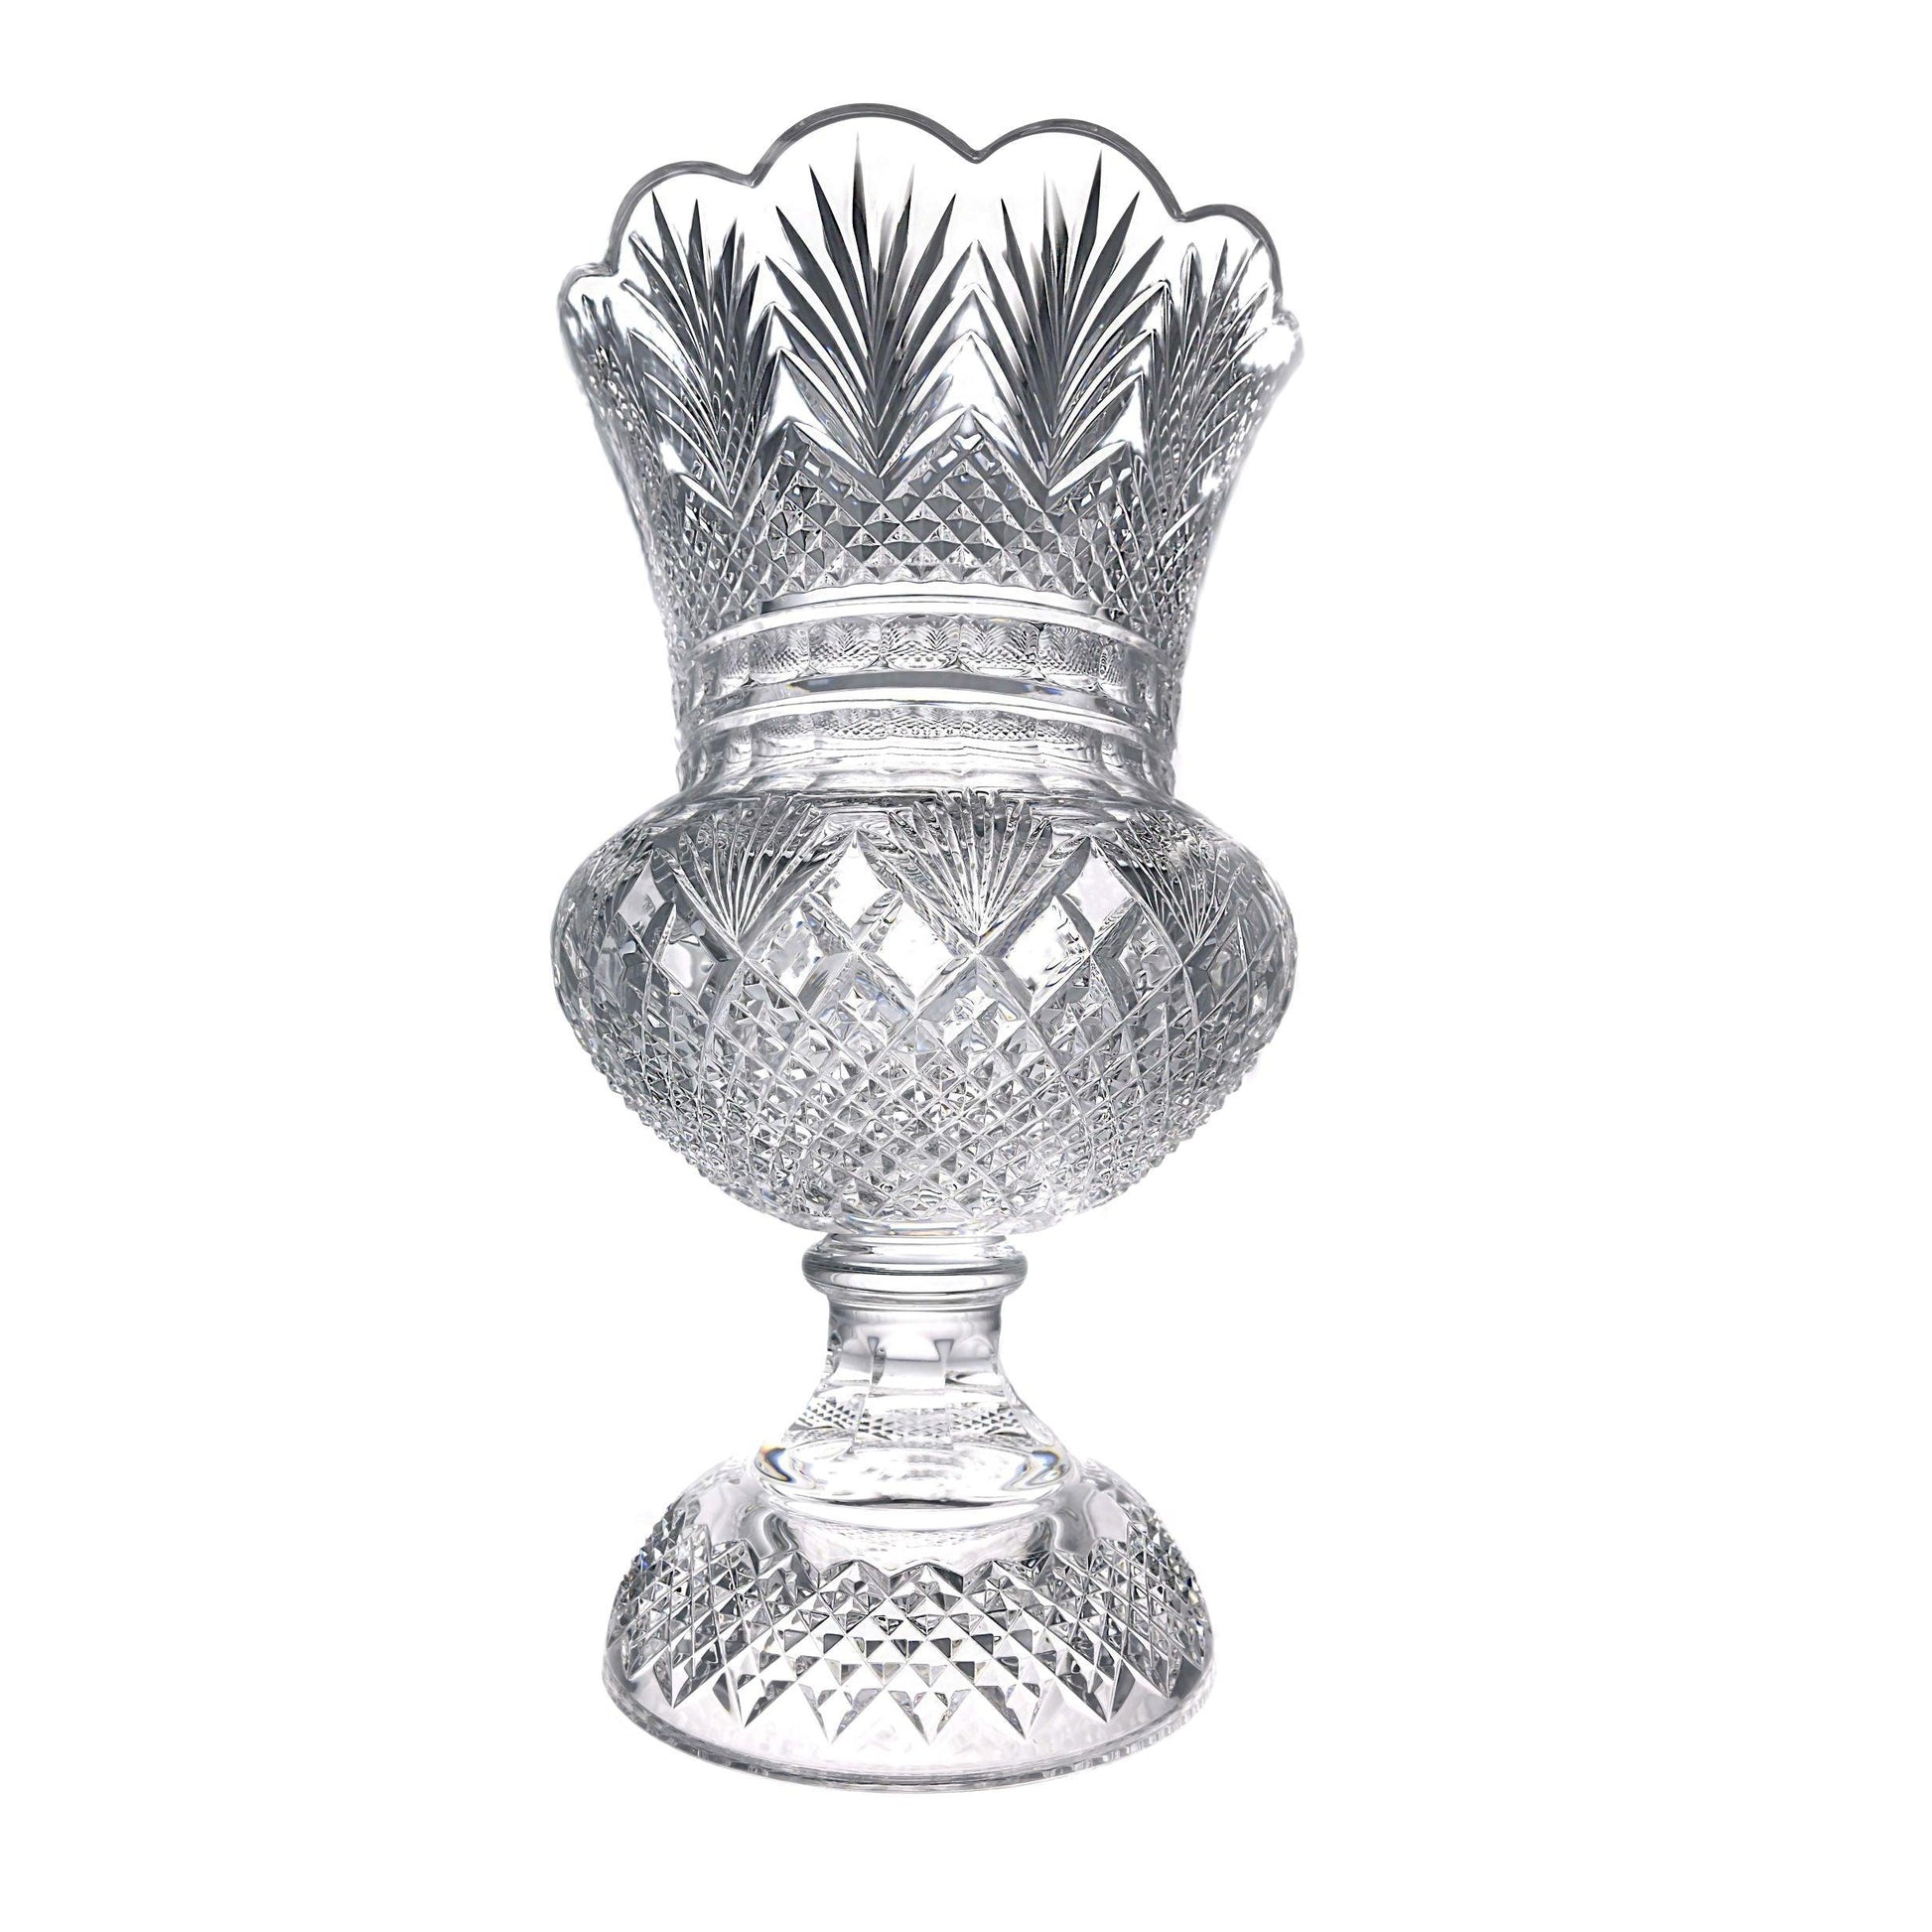 John Conolly 50th Anniversary (Waterford Crystal) - Gallery Gifts Online 